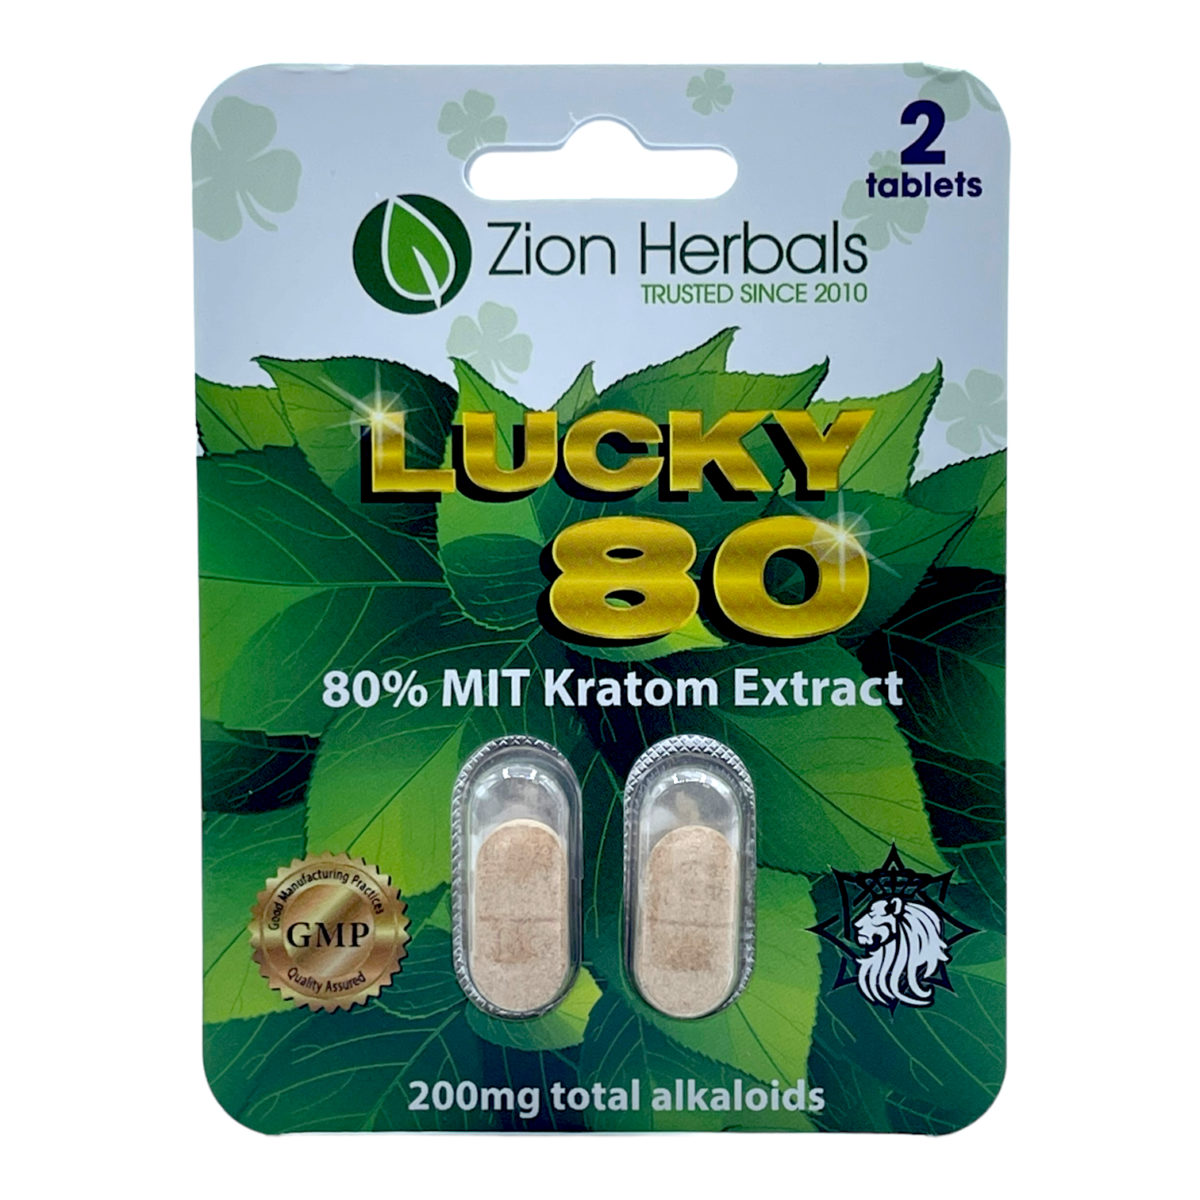 Zion Herbals Lucky 80 Kratom Extract Tablets – 2 count